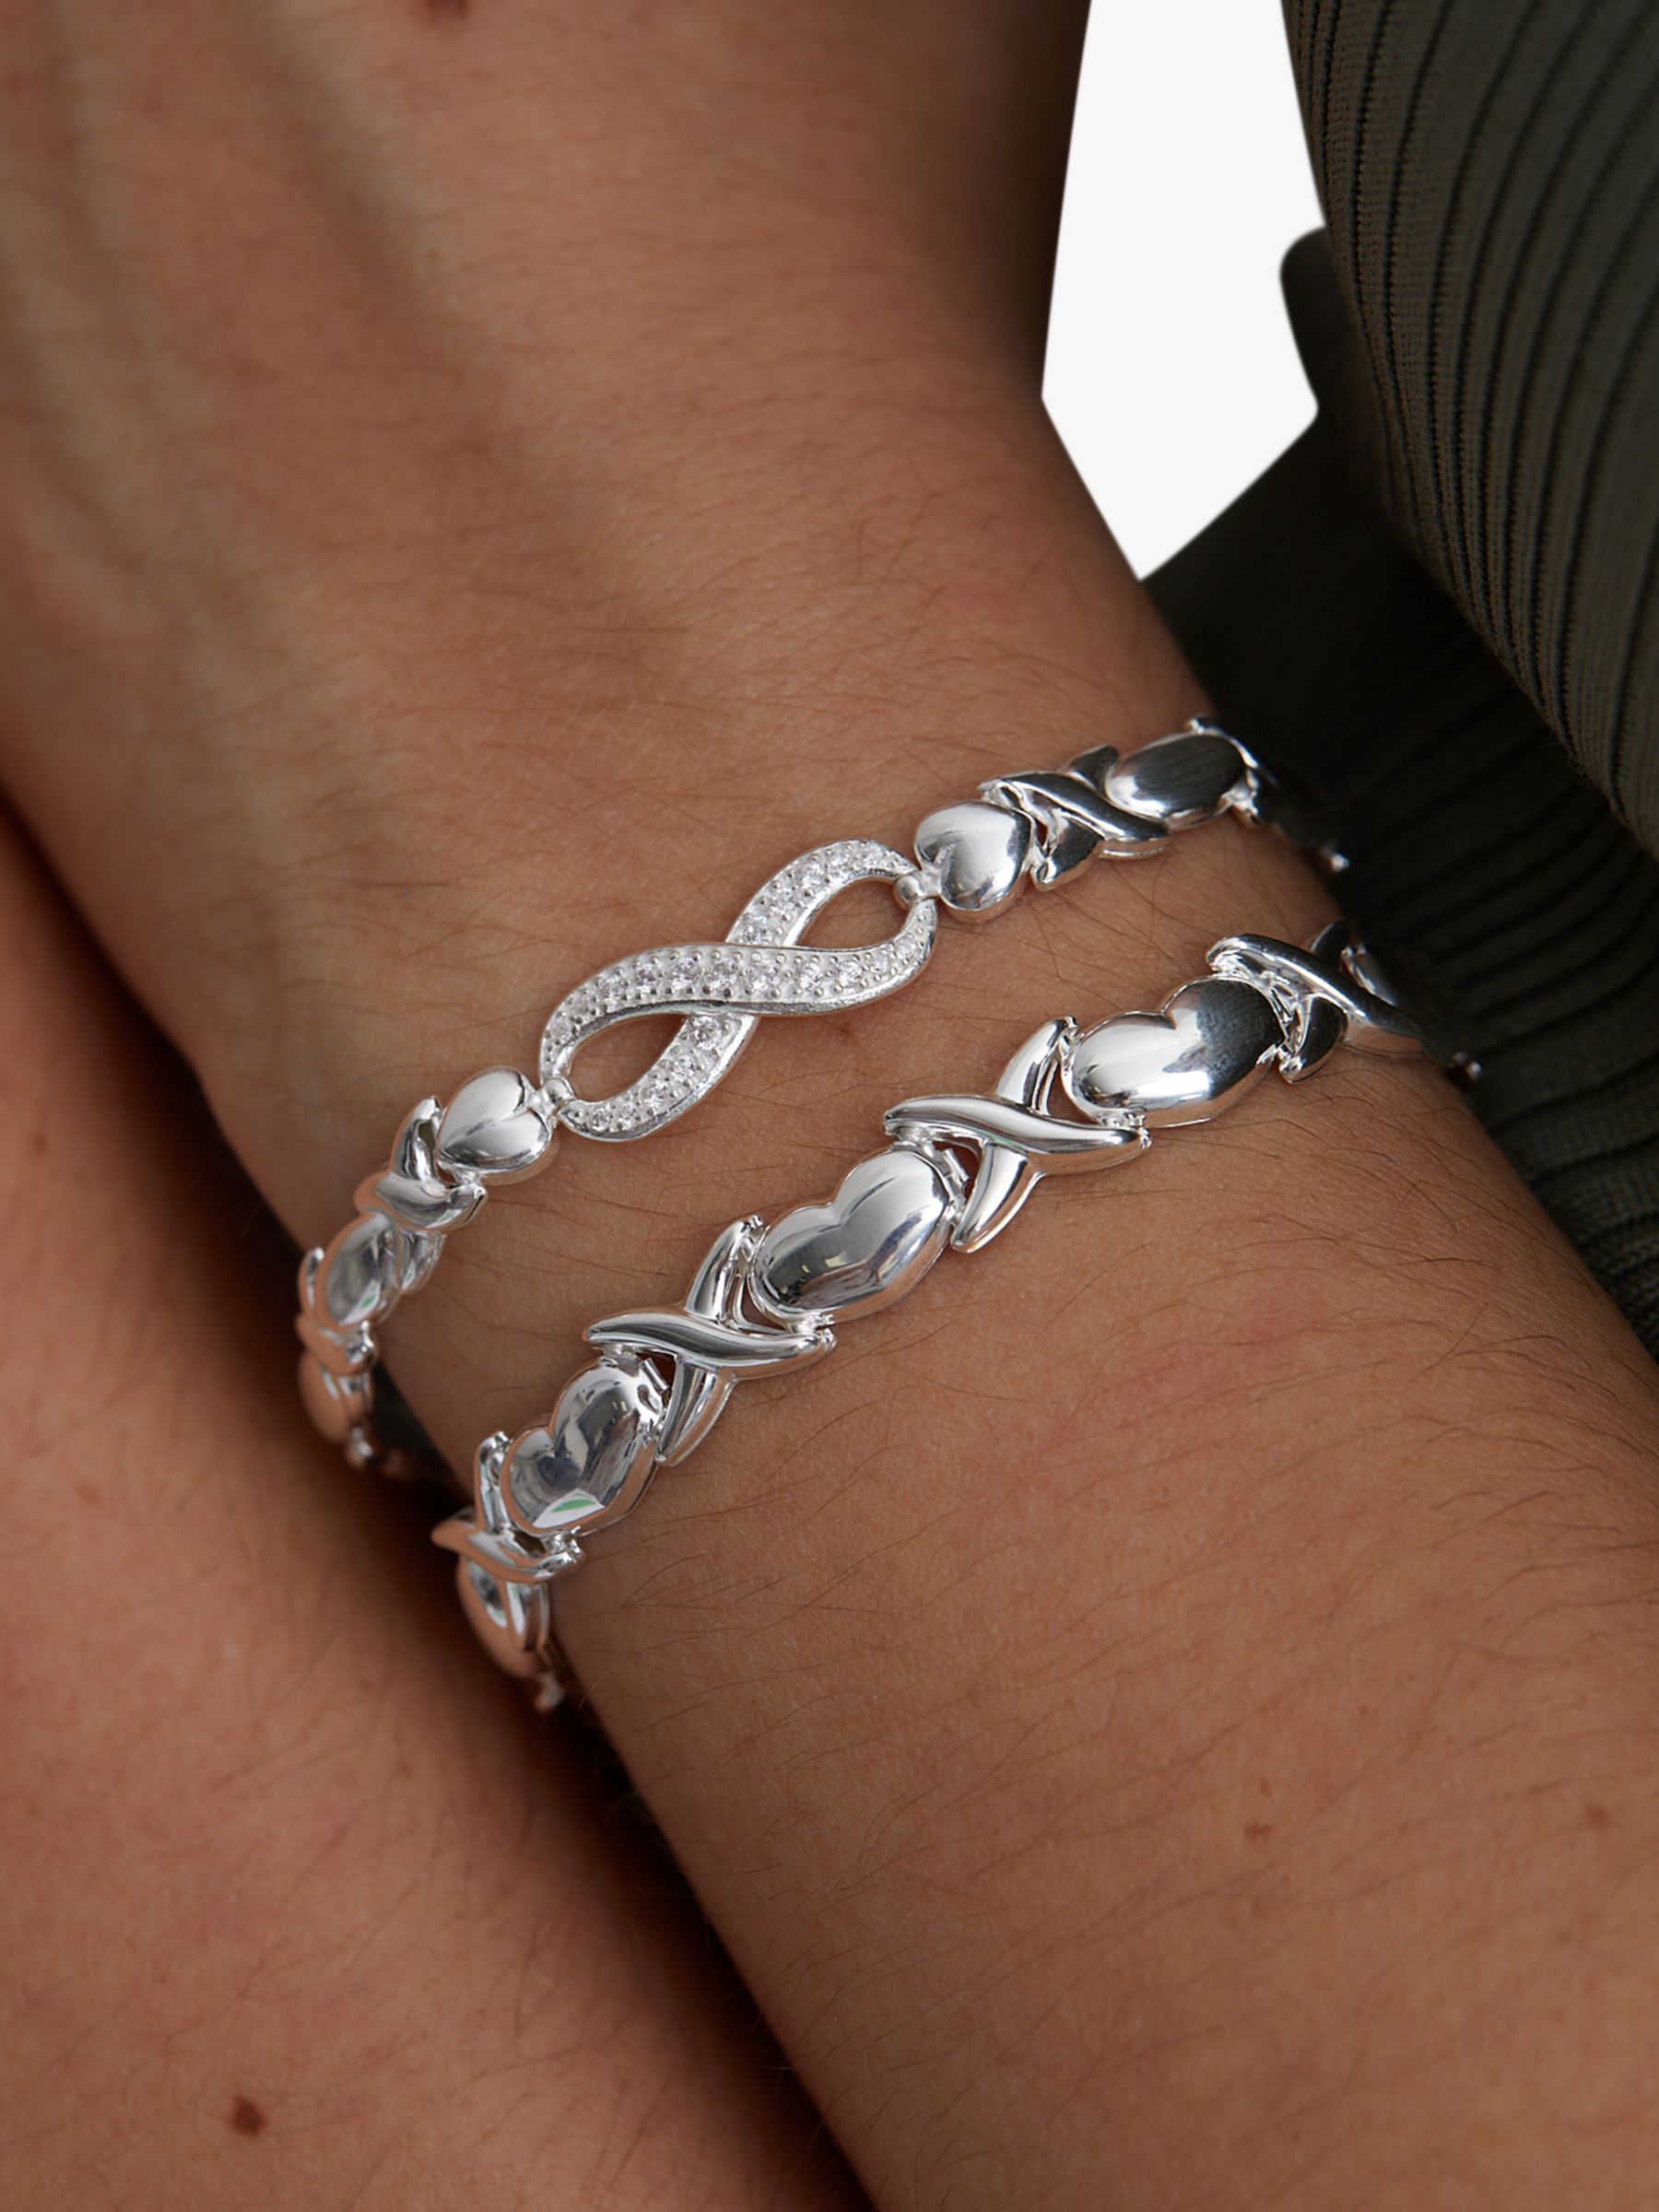 Buy Simply Silver Heart Kiss Bracelet, Silver Online at johnlewis.com